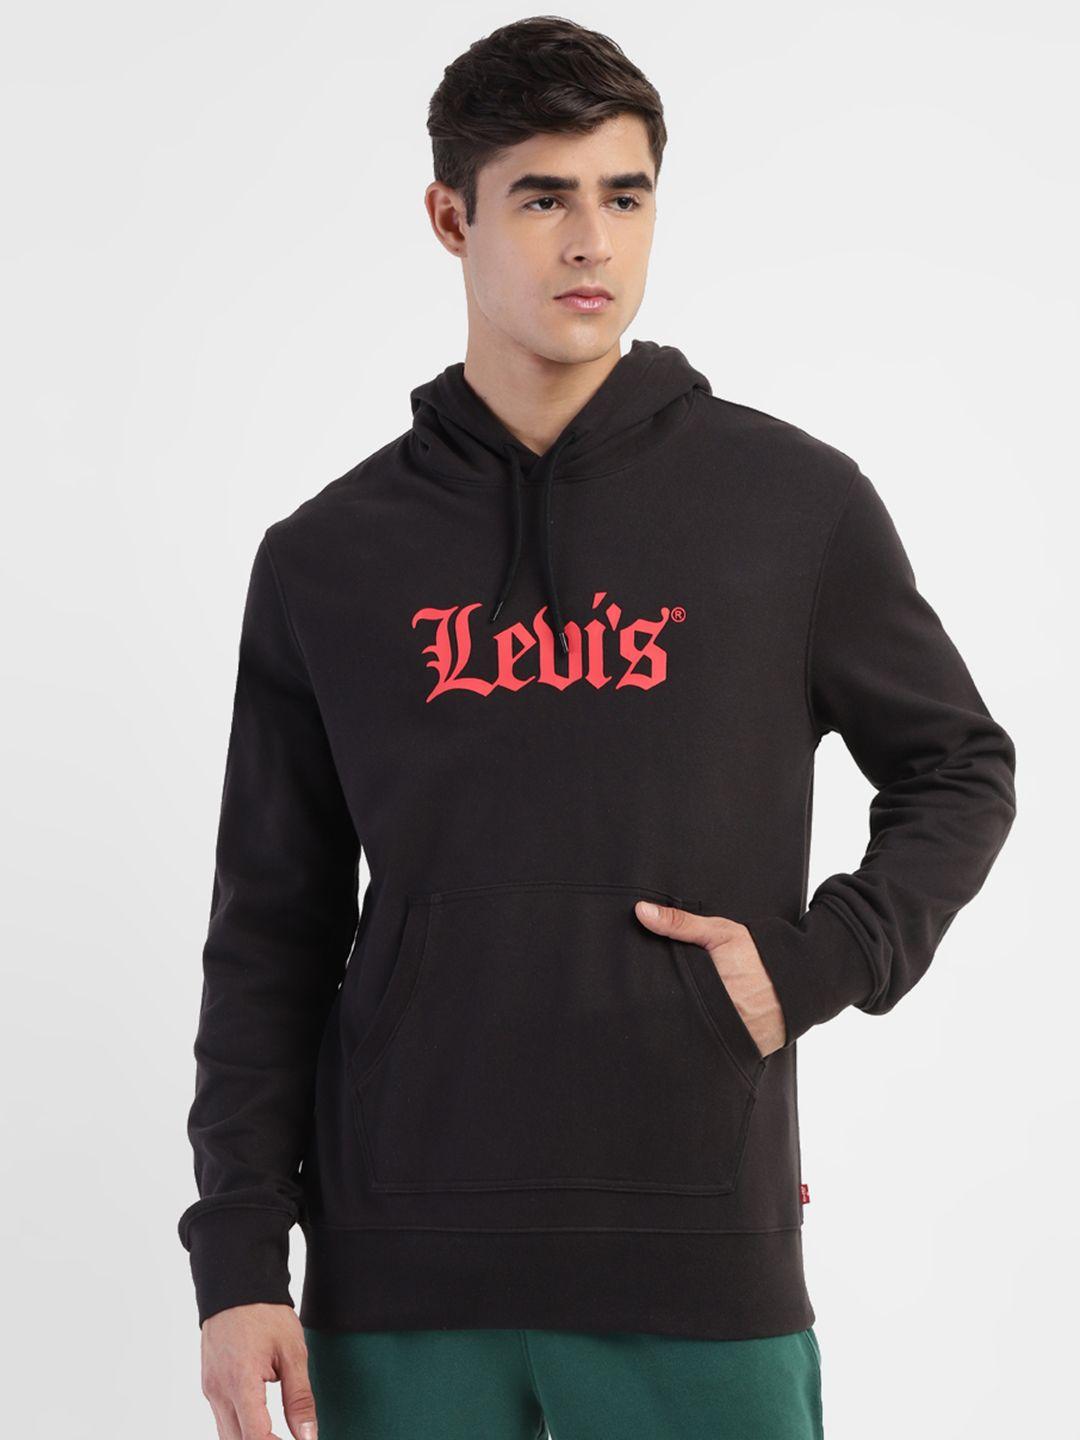 levis-brand-logo-print-knitted-pure-cotton-hooded-sweatshirt